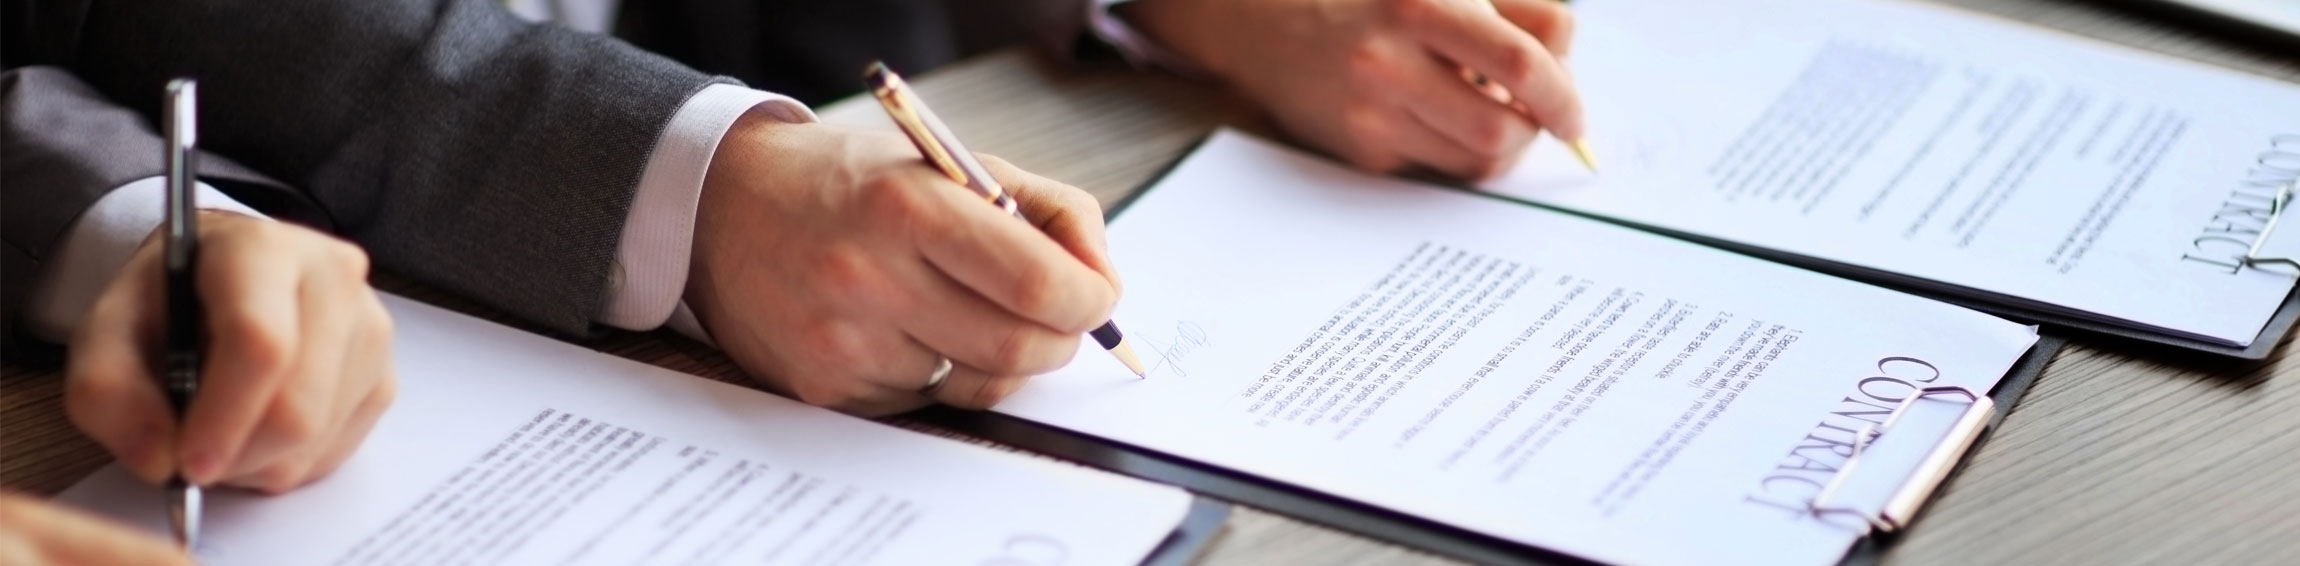 Outsourcing contracts: A guide to starting your business deal